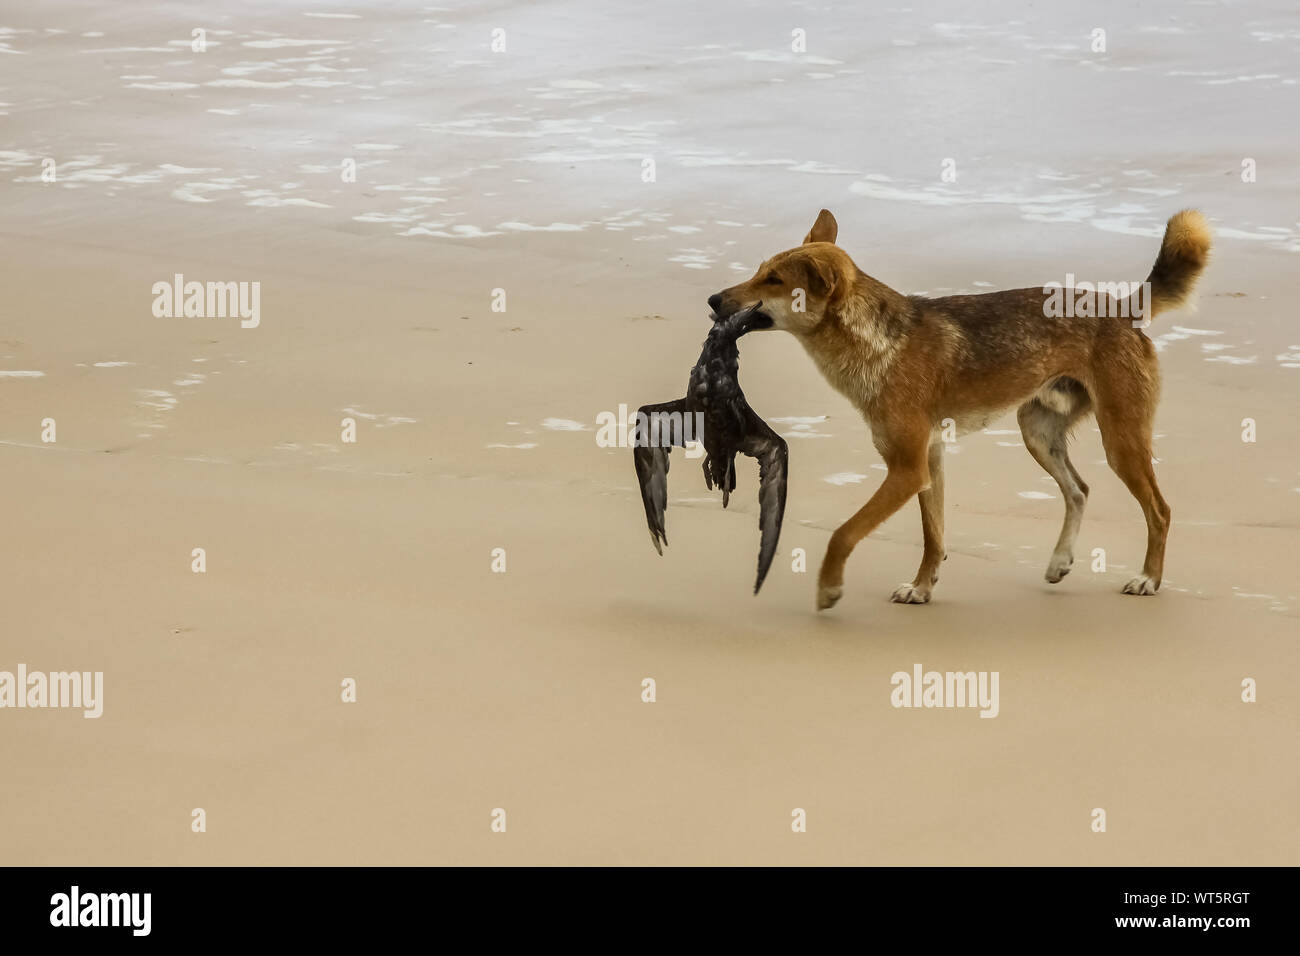 Australian dingo with its prey, a bulwers petrel at 75 mile beach, Fraser Island, Queensland, Australia Stock Photo